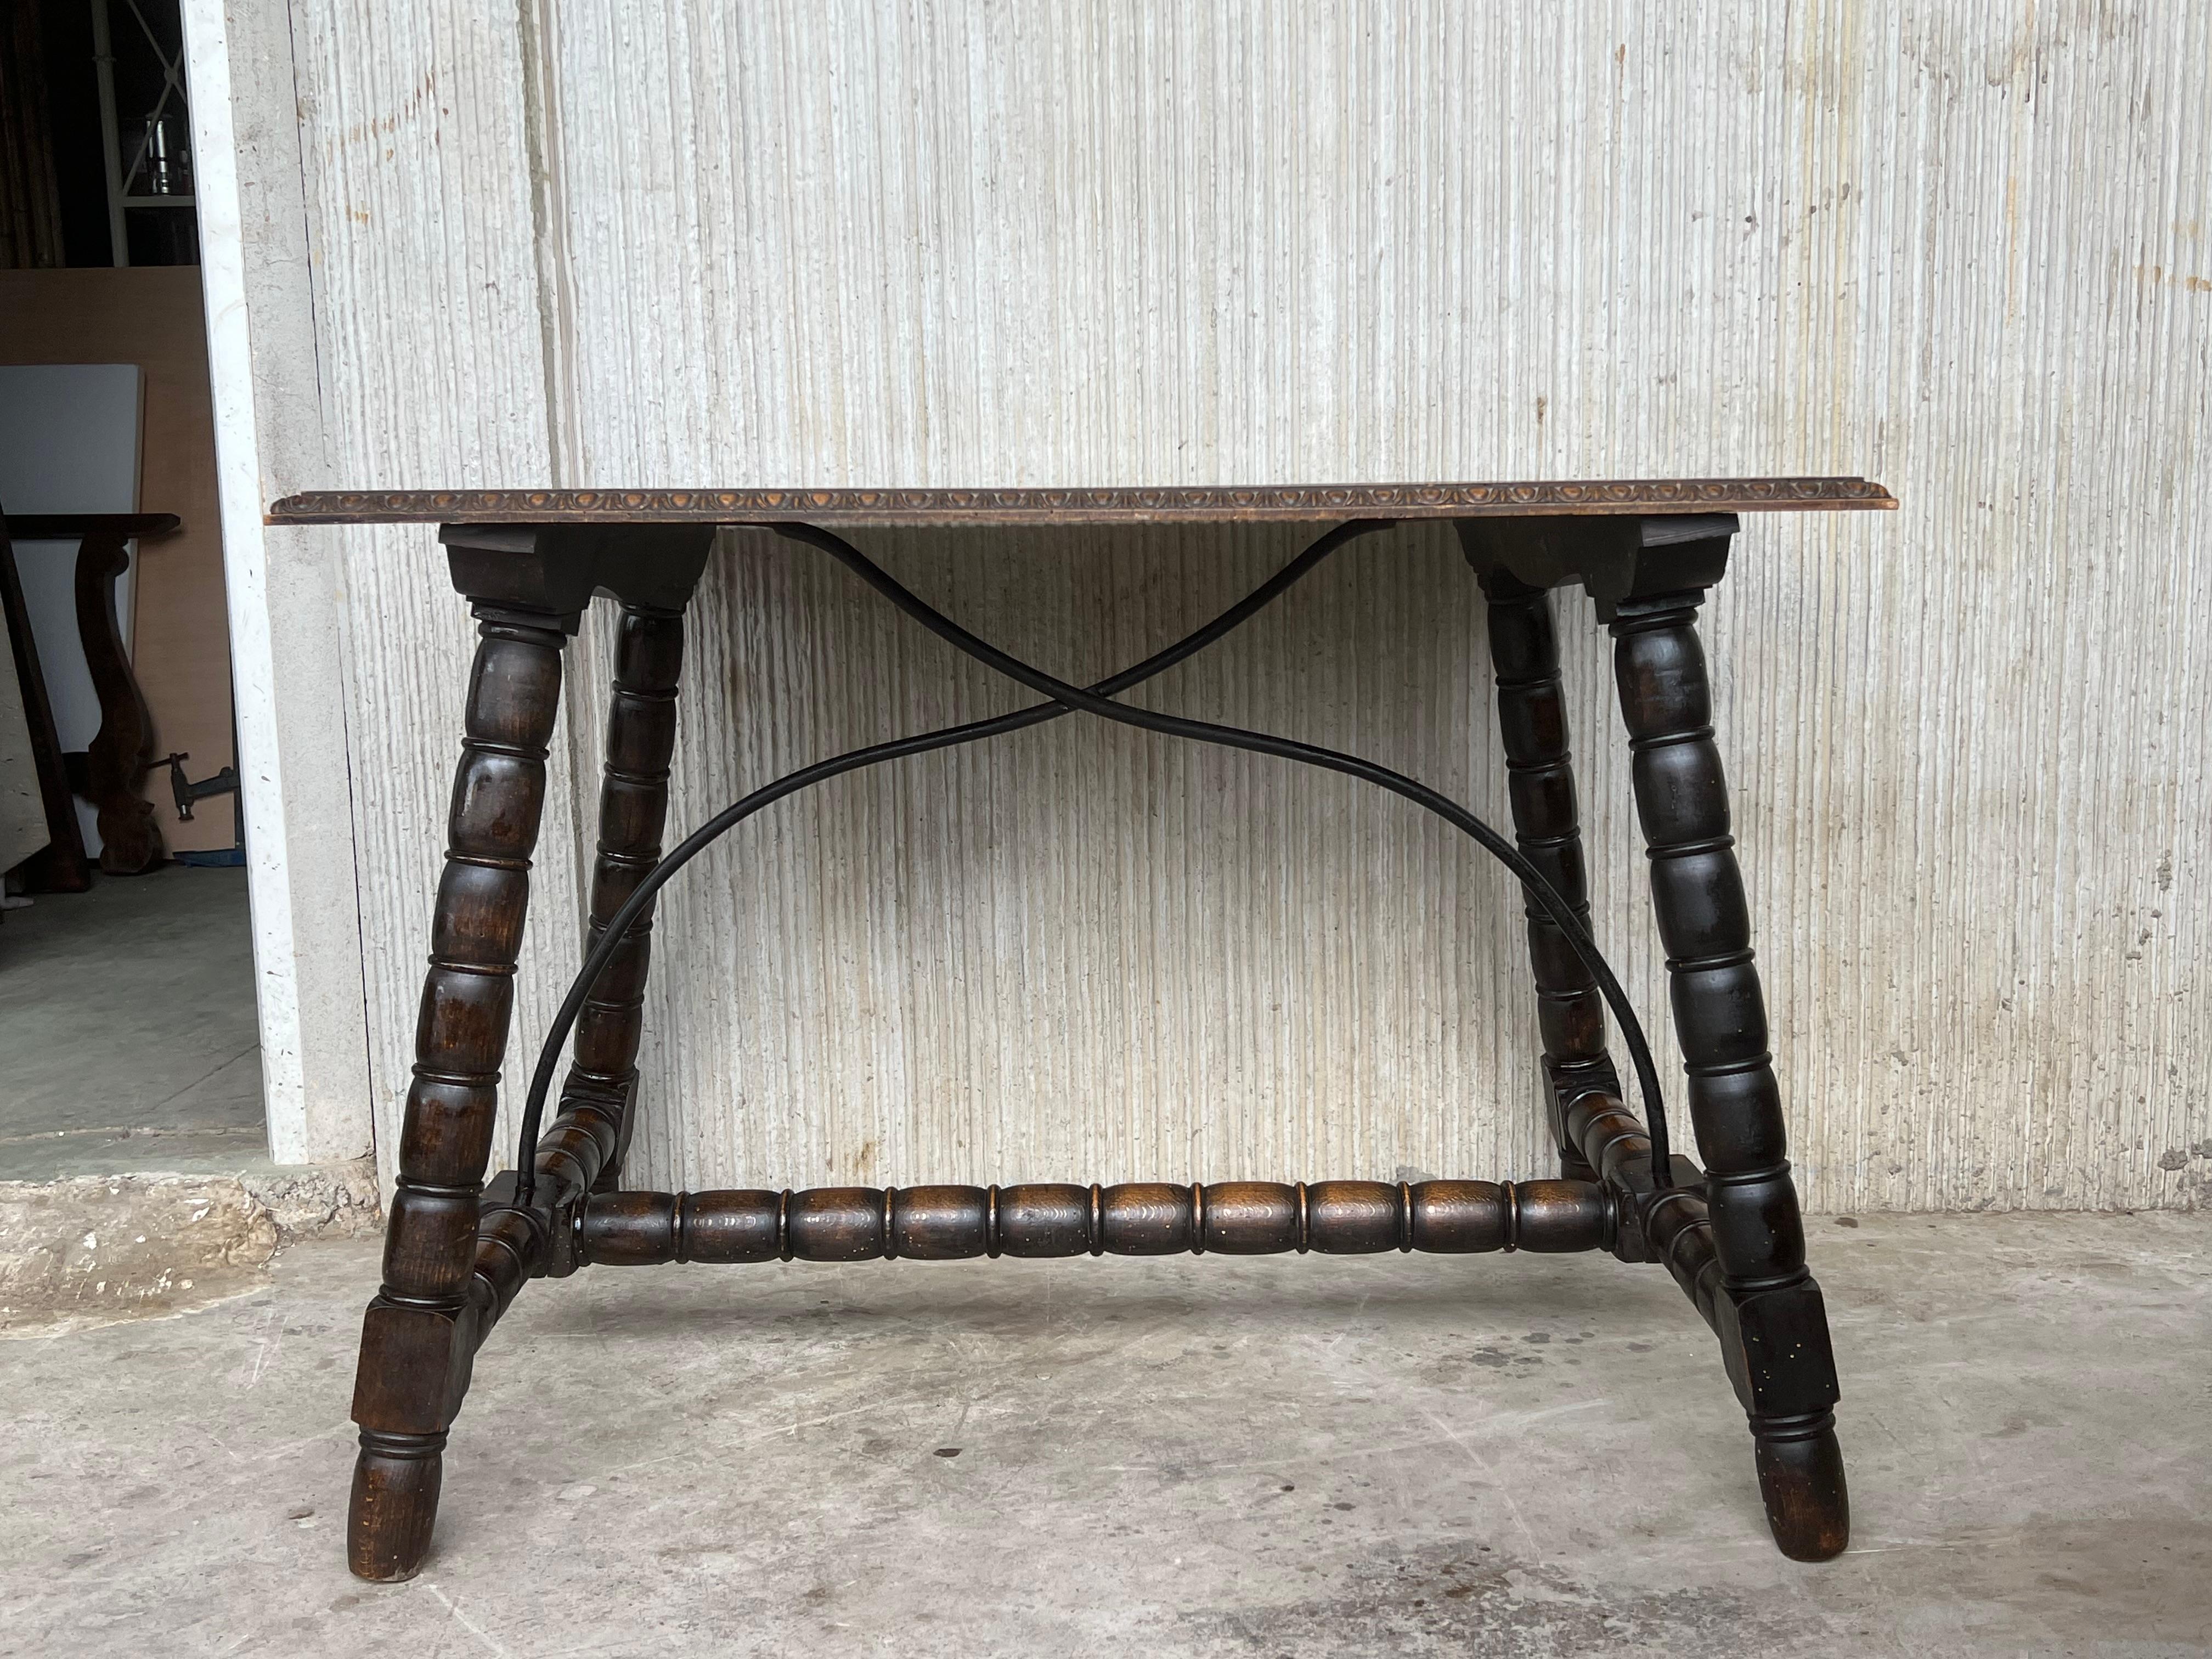 19th Spanish Side Table with cared turned legs and wood stretcher and also an iron stretcher 
The top has a carved edges and a beautiful grain and patina.